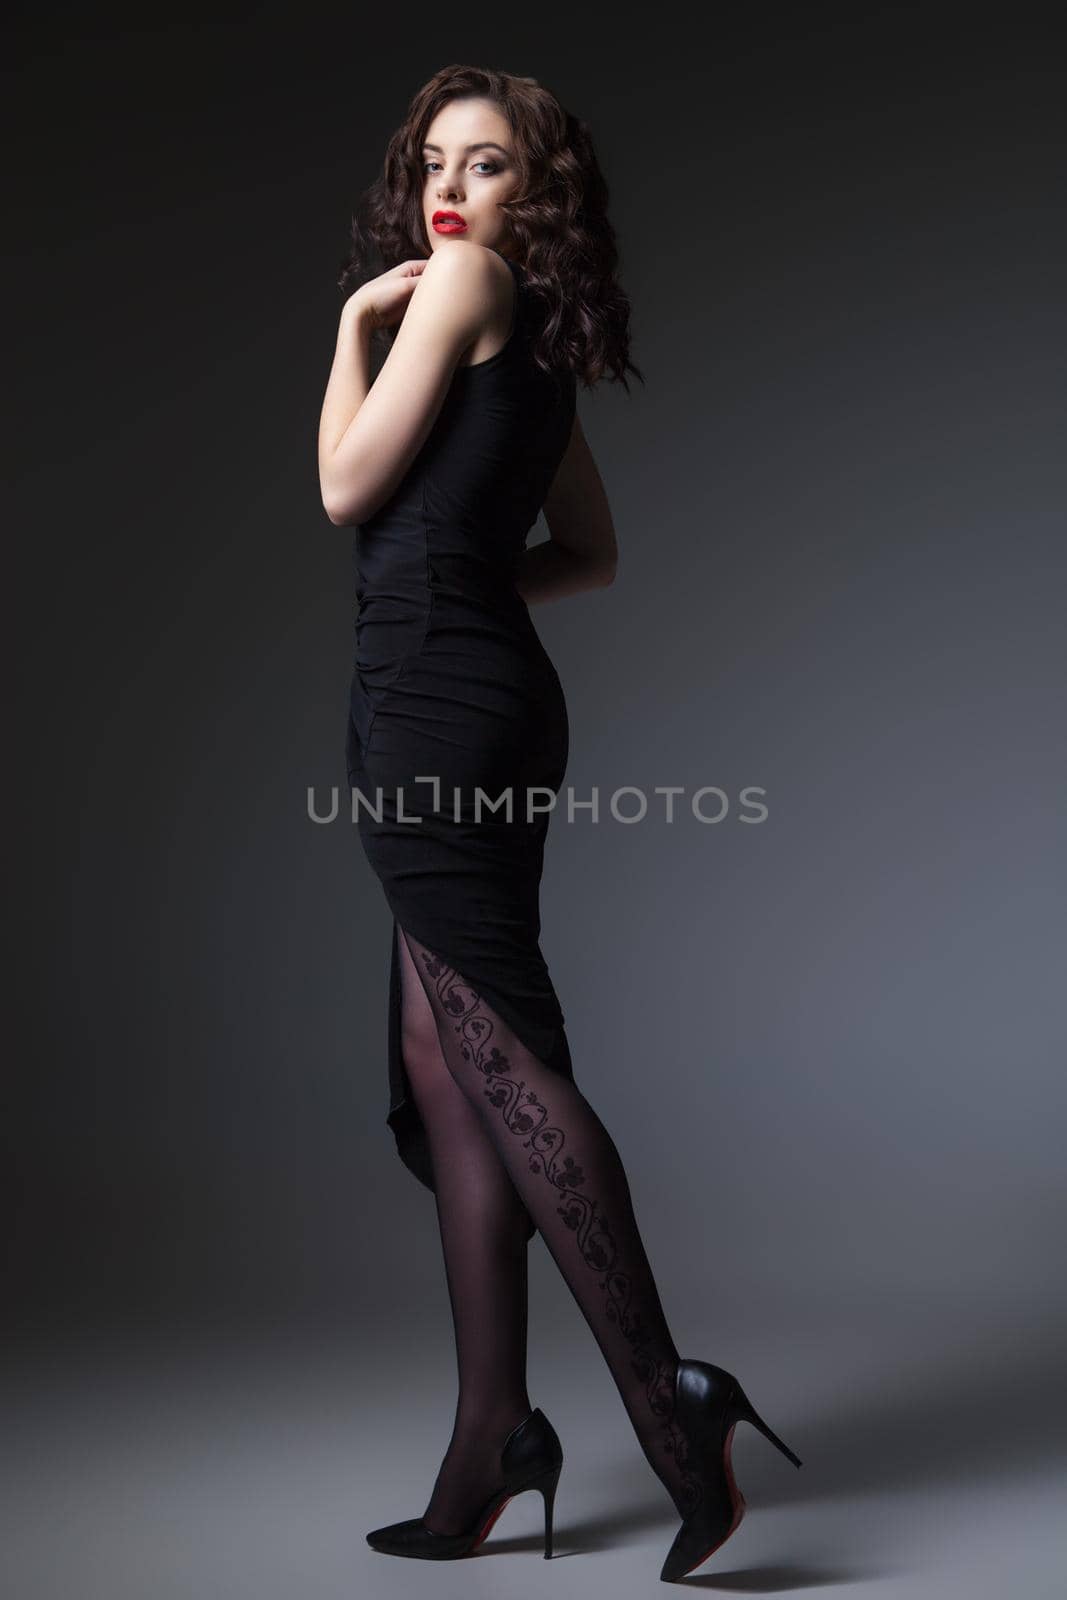 Gorgeous young woman posing in black dress and looking at camera.